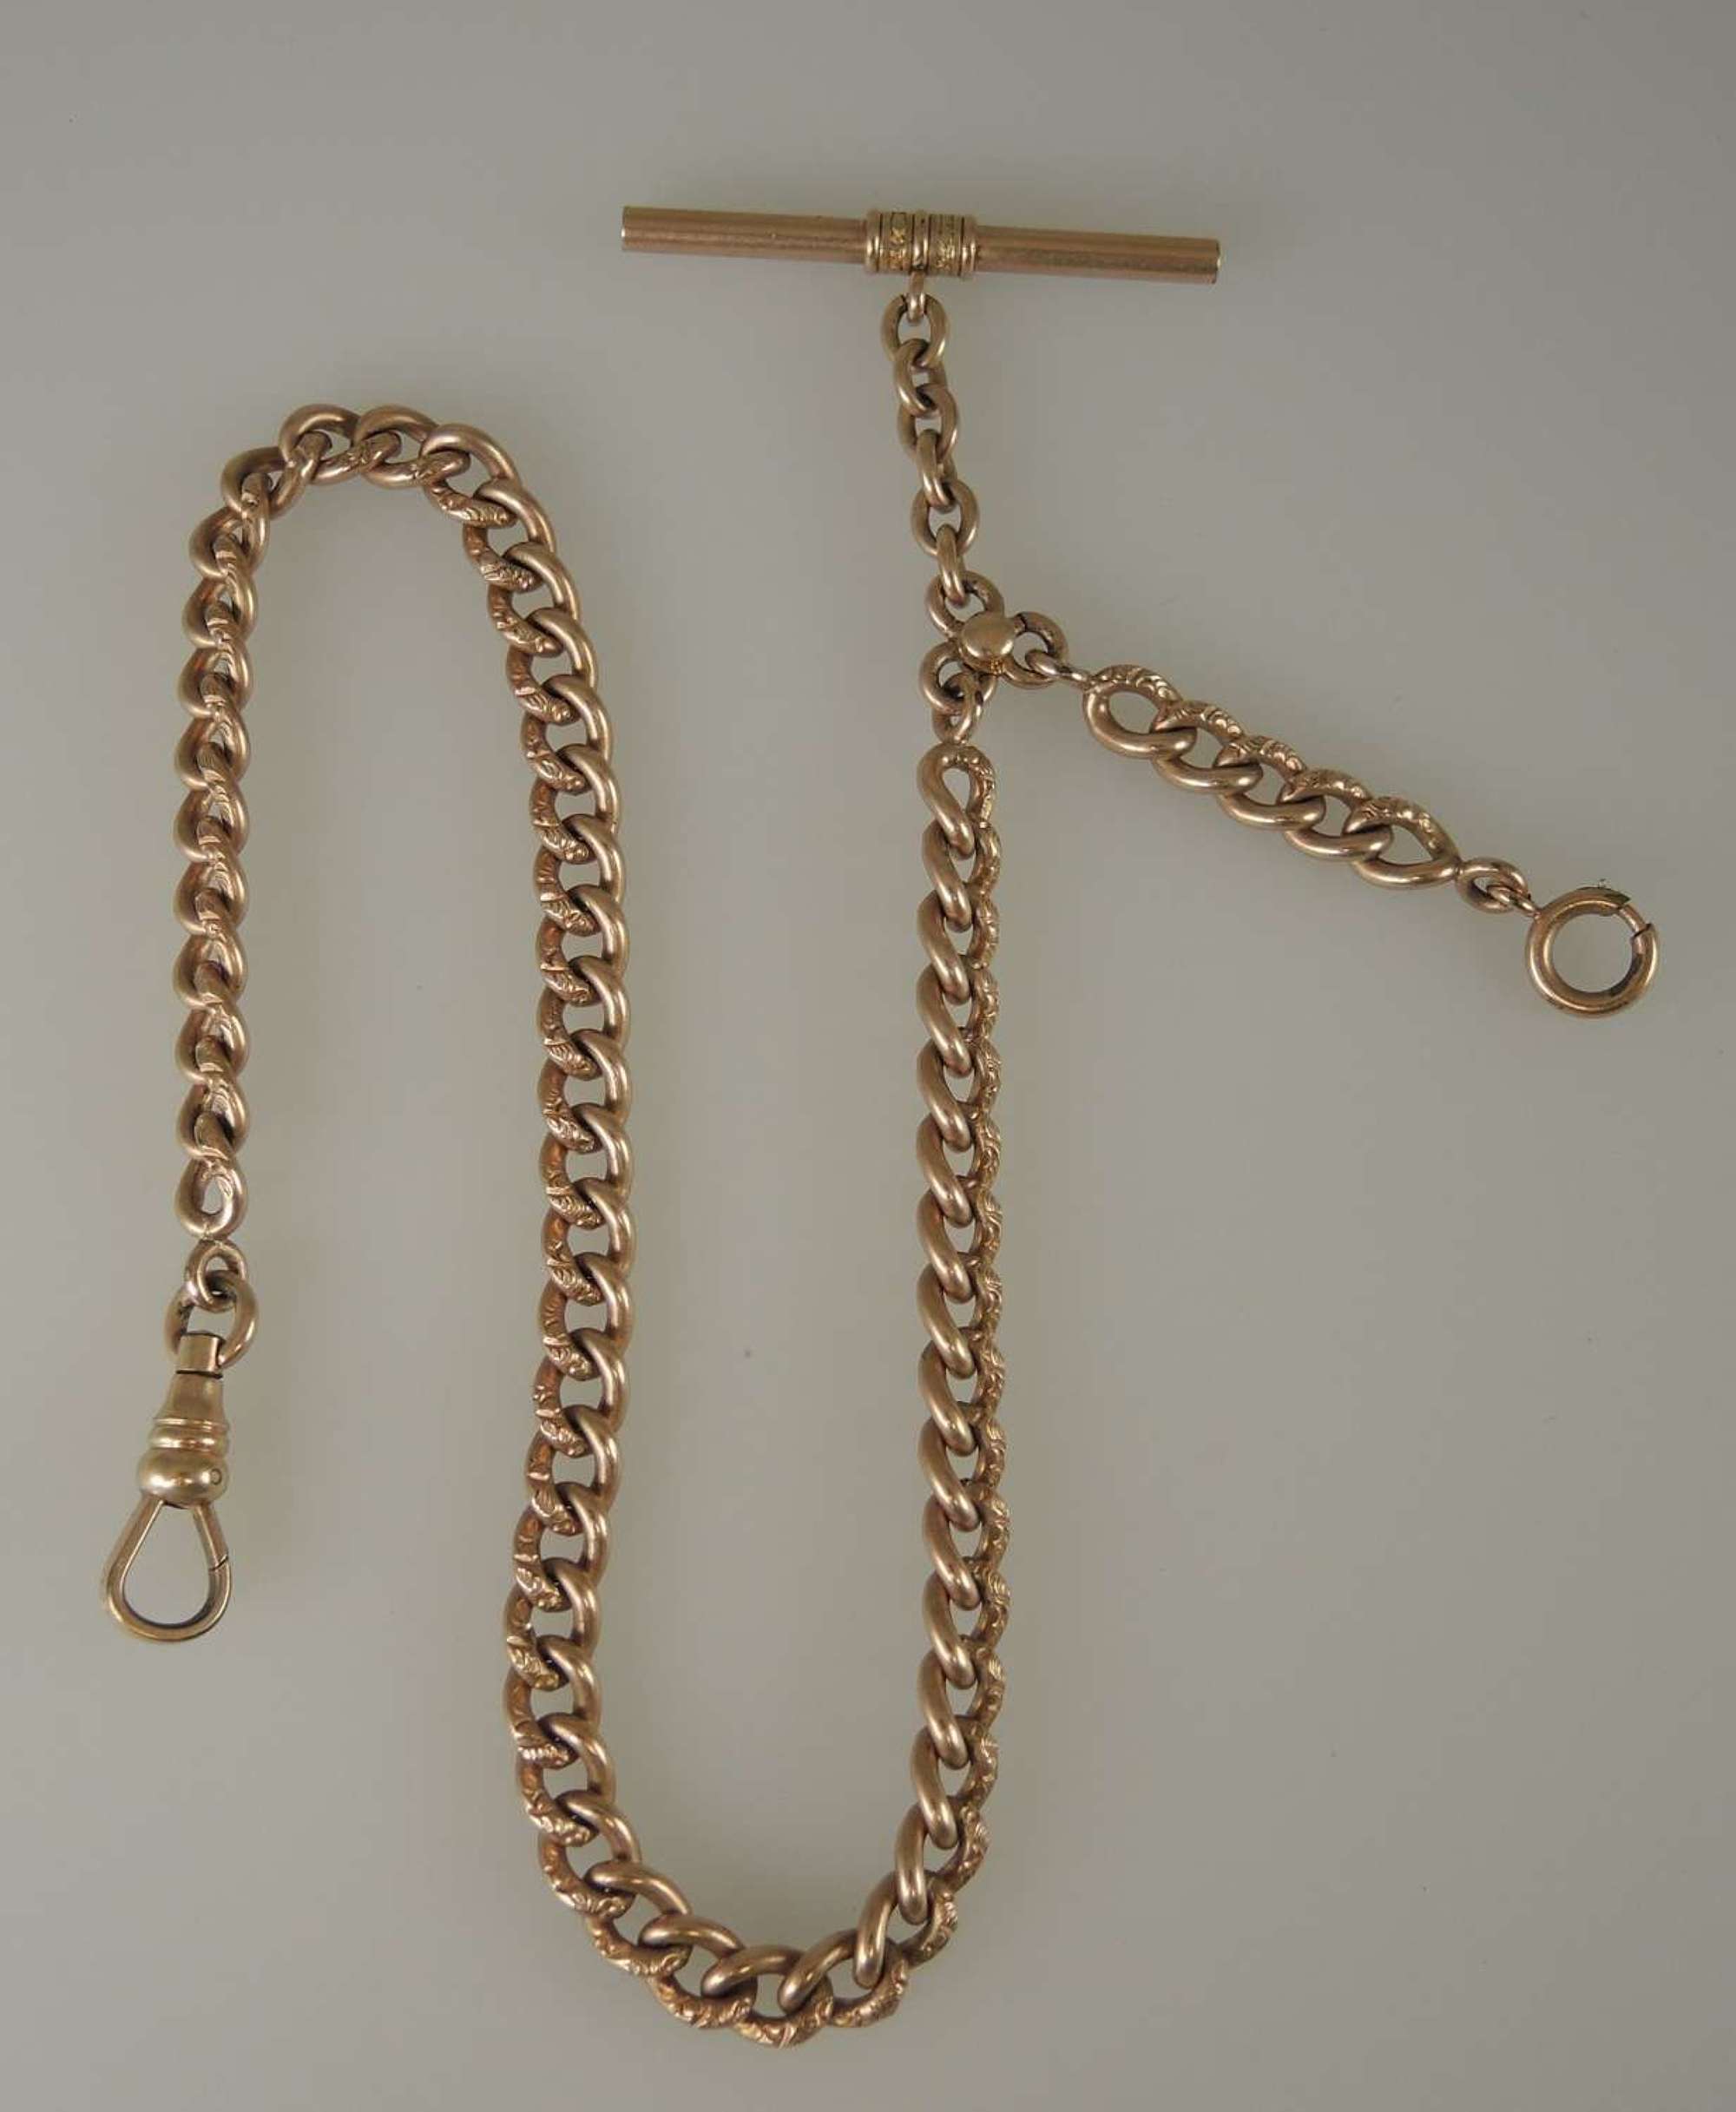 Good Gold plated watch chain c1890